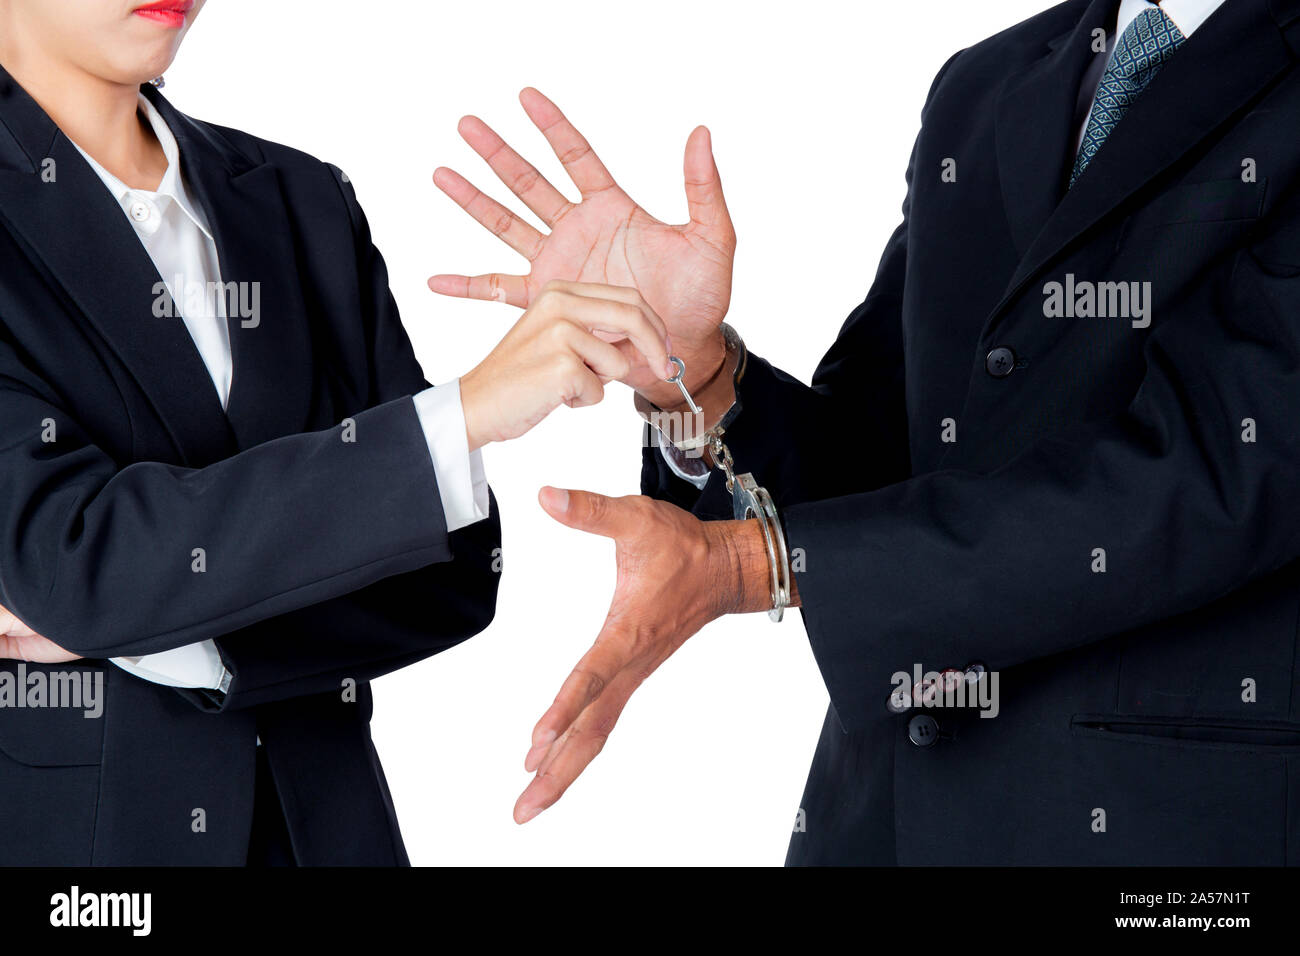 businessman in handcuffs and woman hand offering key solving business ideas concept isolated on white background Stock Photo